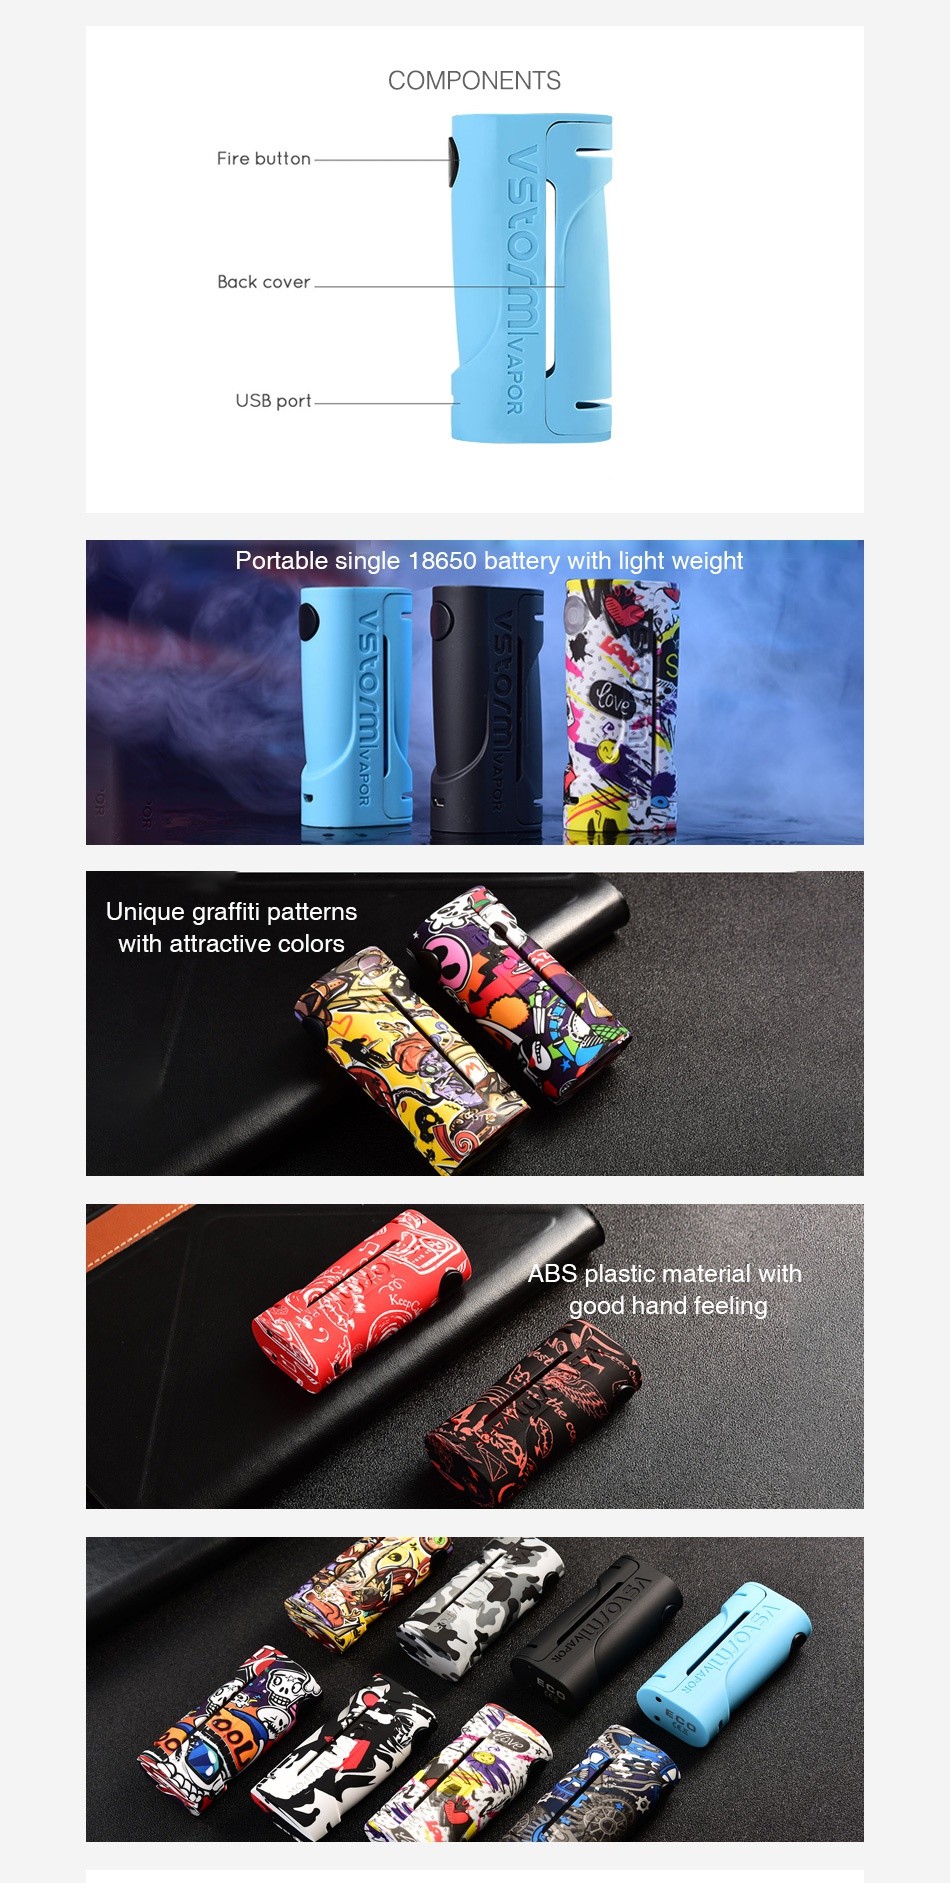 Vapor Storm ECO 90W Box MOD COMPONENTS Fire button Back cover USB port 0O  Portable single 18650 battery with light weight U Unique graffiti patterns ith attractive colors BS plastic material with good hand feeling